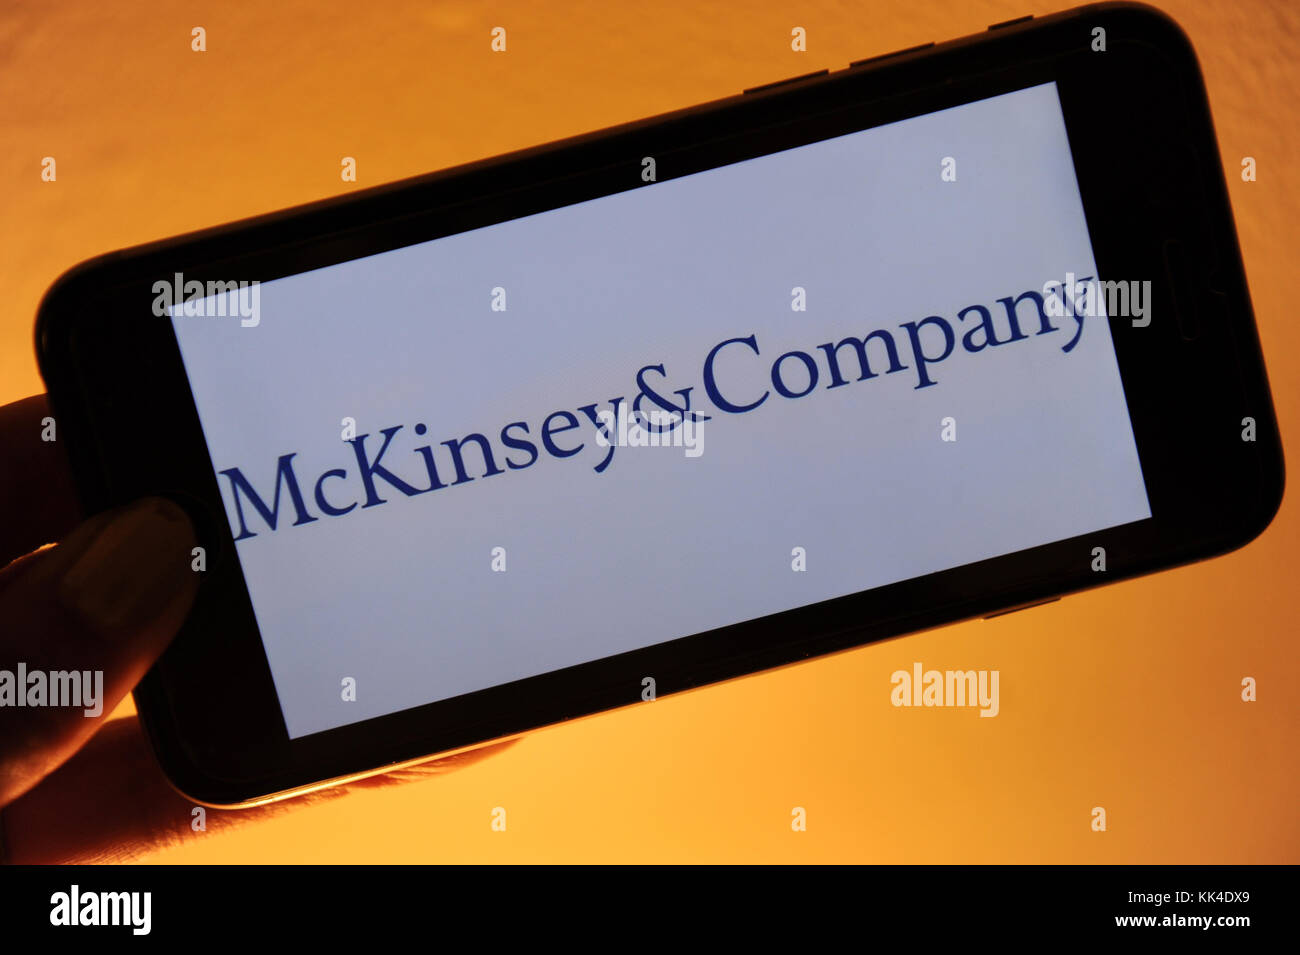 McKinsey & Company is a worldwide management consulting firm. Stock Photo